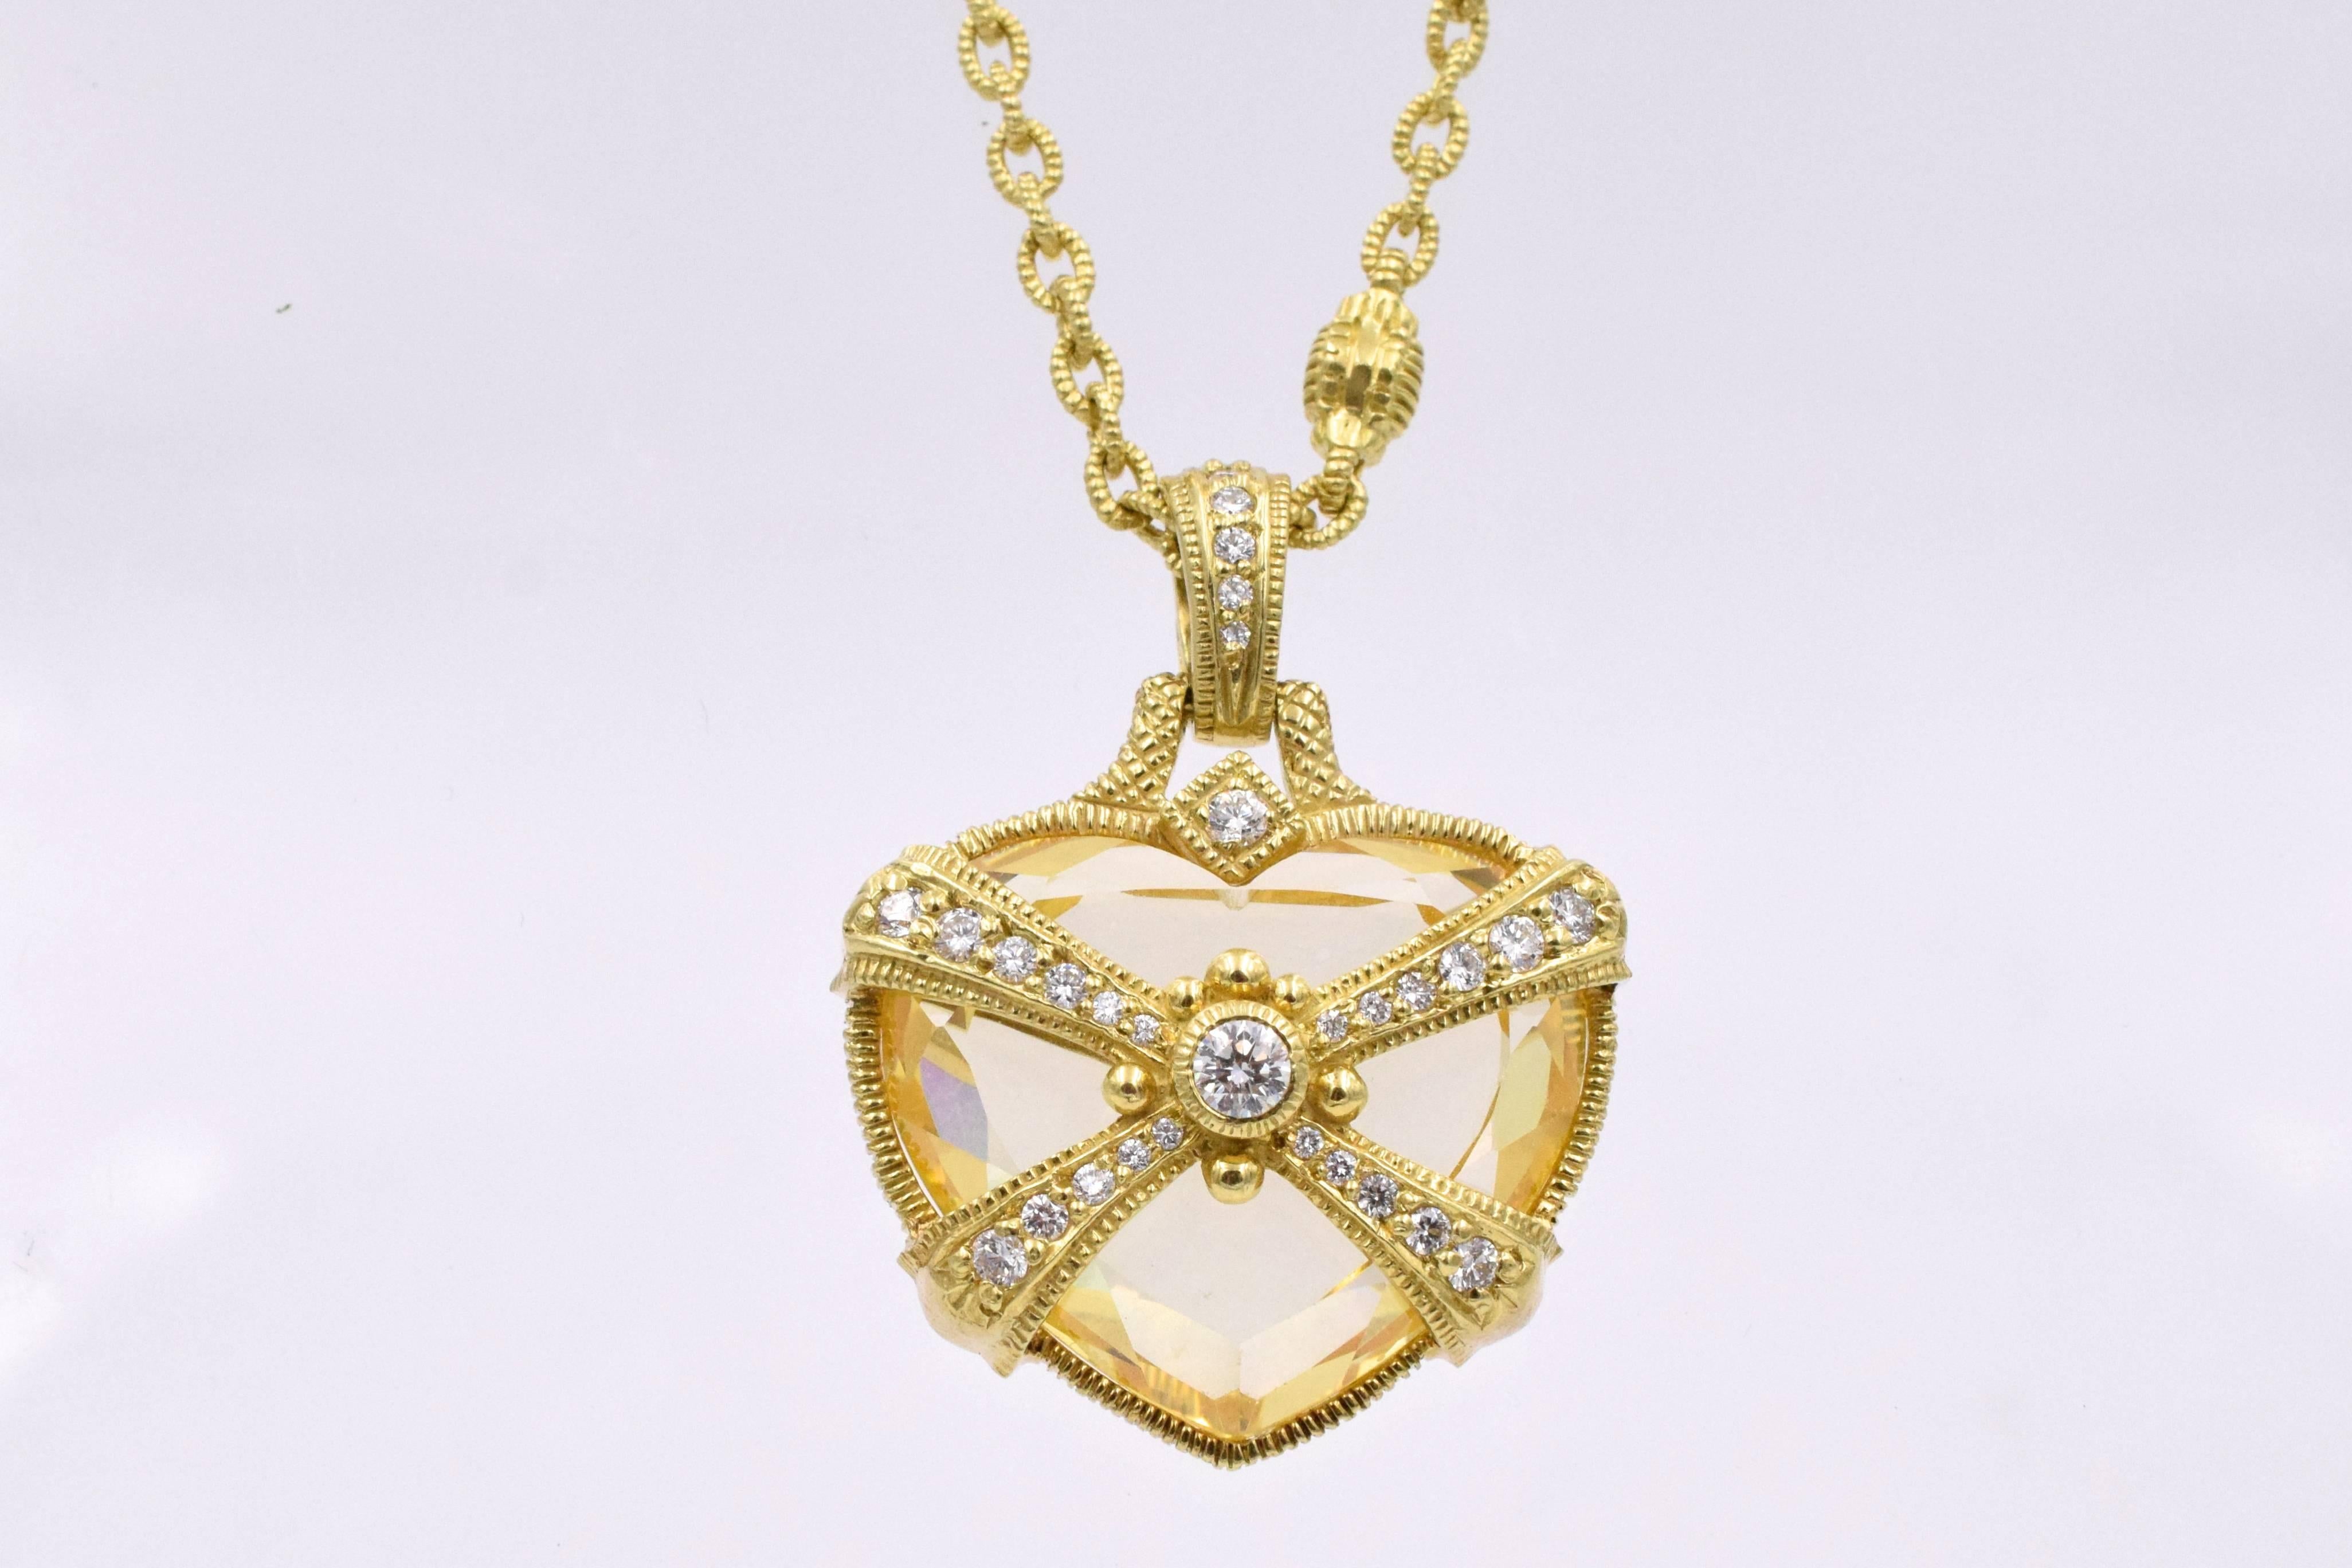 Beautiful 10 carats heart shape citrine accented with 30 brilliant shape diamonds (0.75 carats) suspended from 32 inches long gold link chain.
Gold weight is 30.6 dwt

